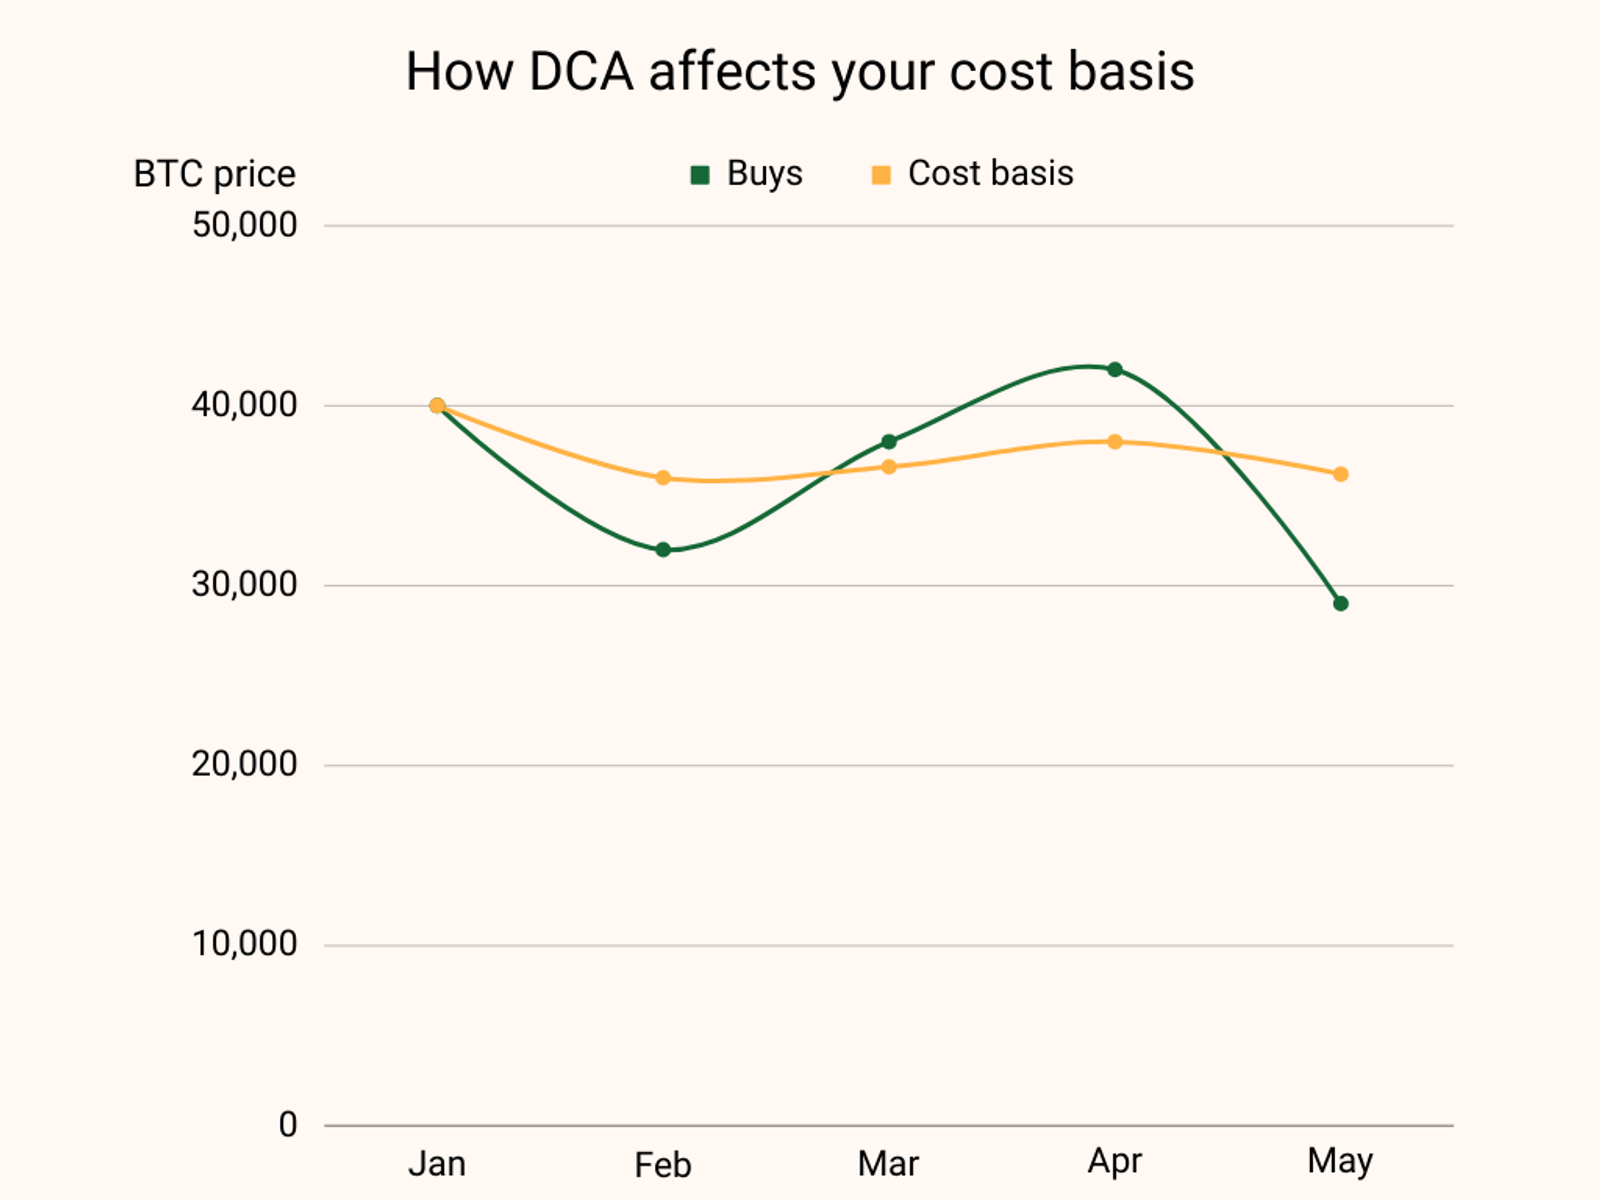 how DCA affects cost basis